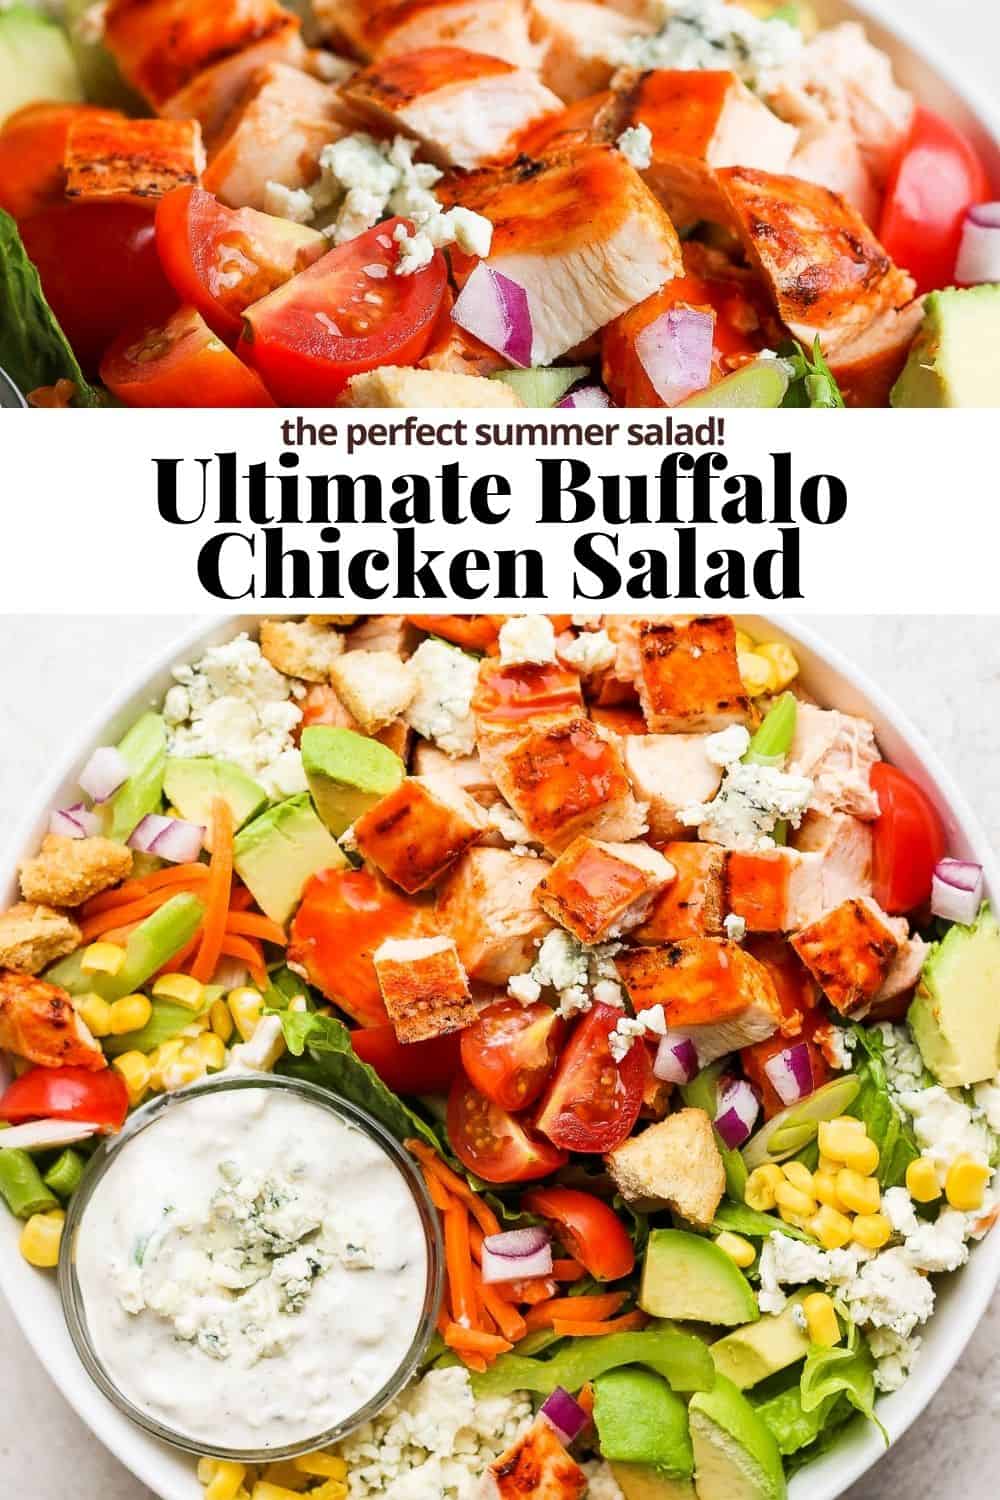 Pinterest image for an ultimate buffalo chicken salad.